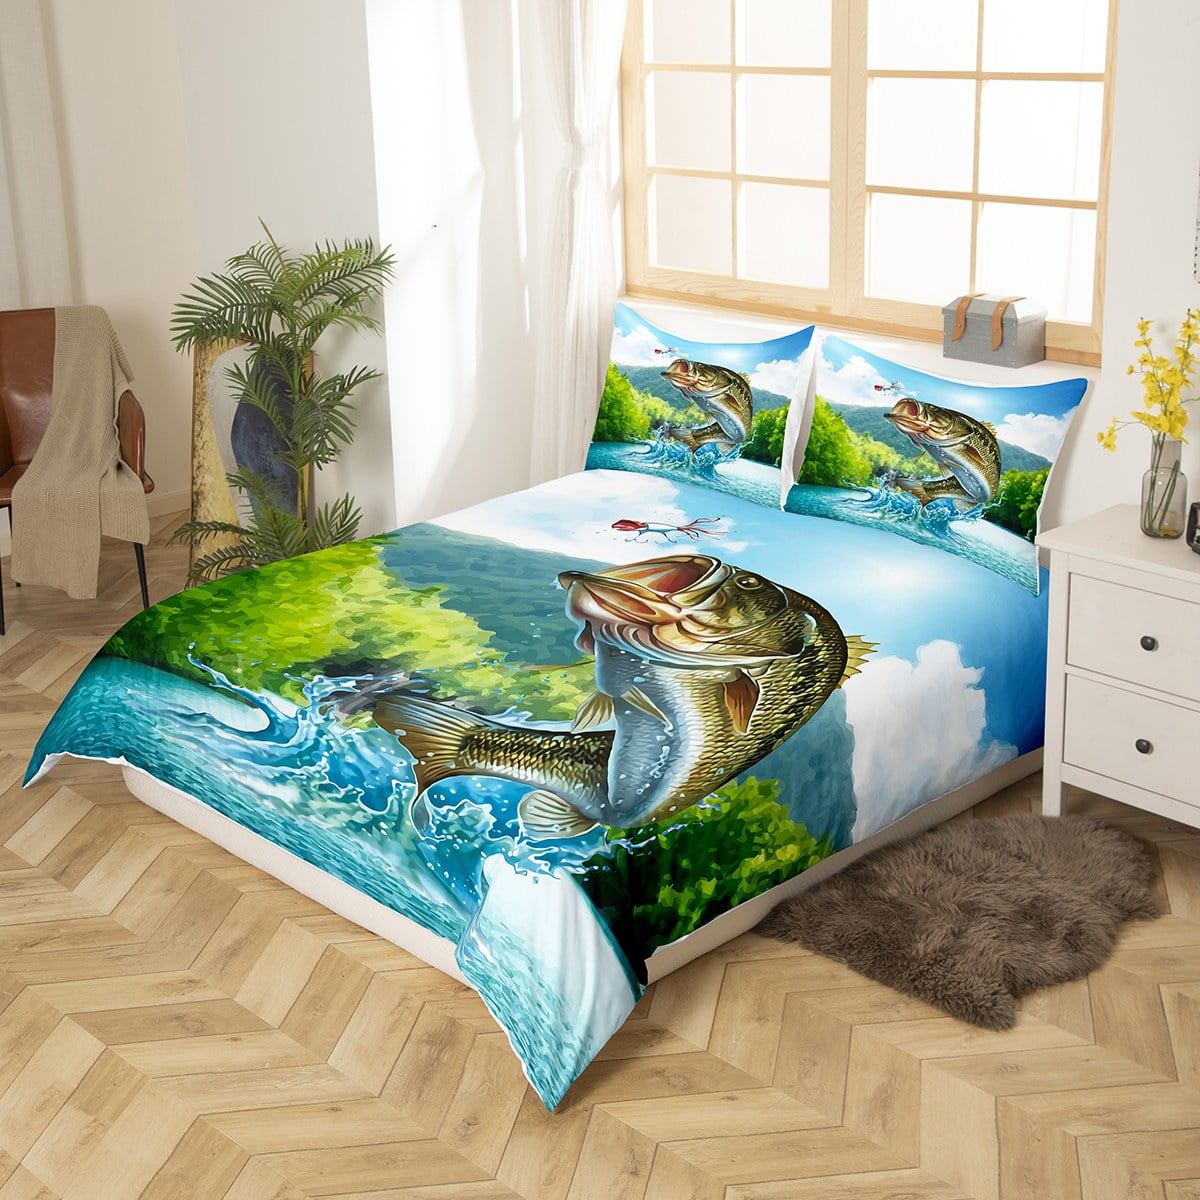 HOSIMA Big Pike Fish Bedding, Striped Bass Big Fish Eat Small Fish Pattern  Hunting and Fishing Themed Duvet Cover Queen Size for Kids Boys Room Decor